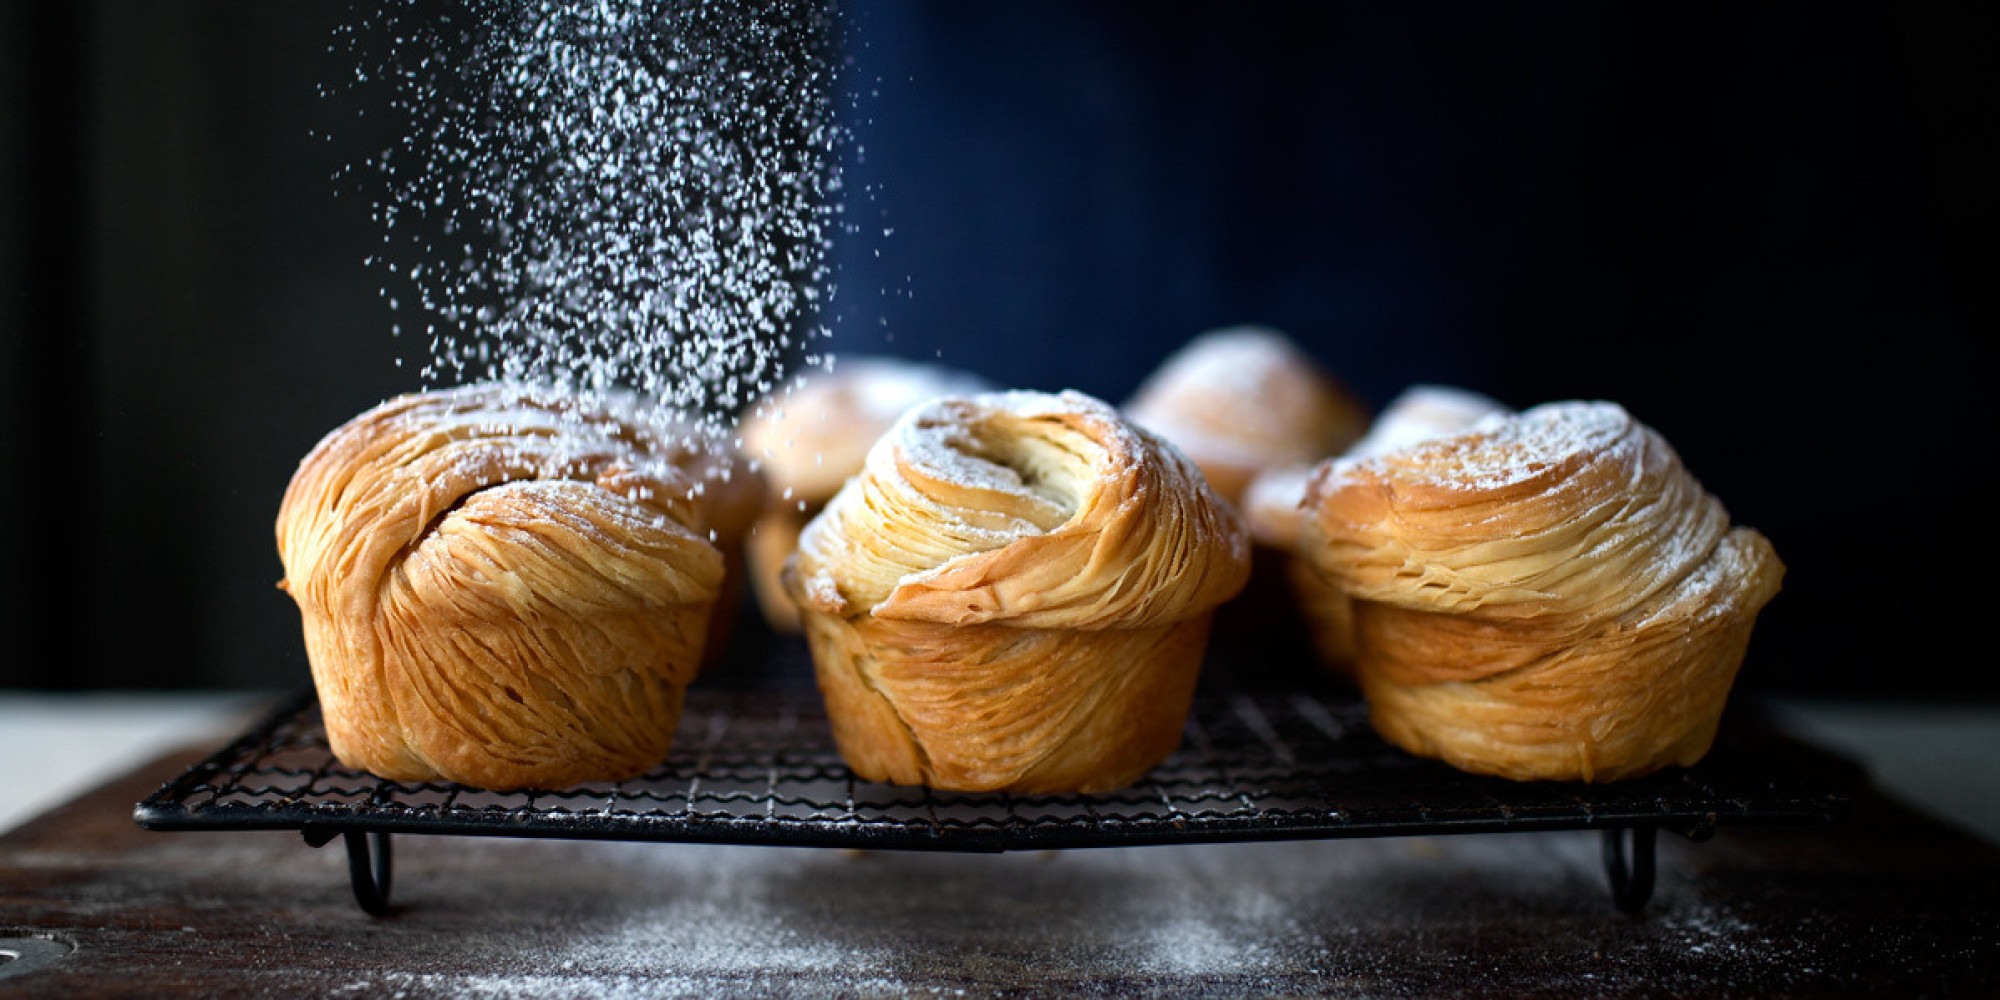 Cruffin Recipes To Help You Make This Croissant-Muffin Hybrid | HuffPost